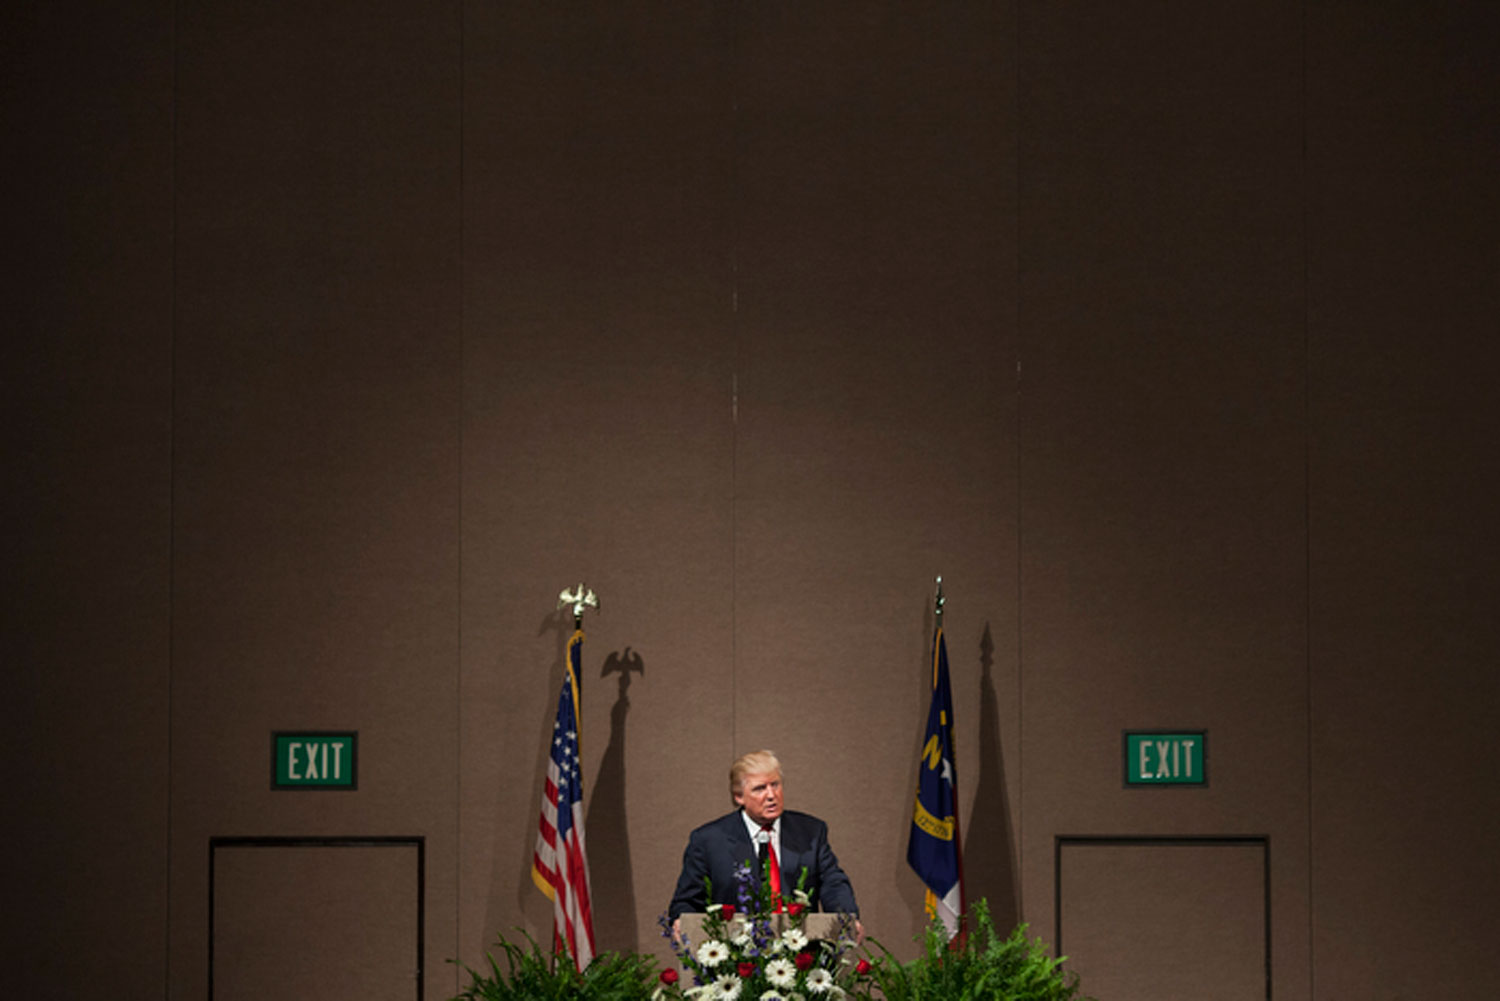 Image: Donald Trump speaks at The North Carolina GOP Convention at the Koury Convention Center in Greensboro, N.C., during Joe Klein's annual road trip. June 1, 2012.